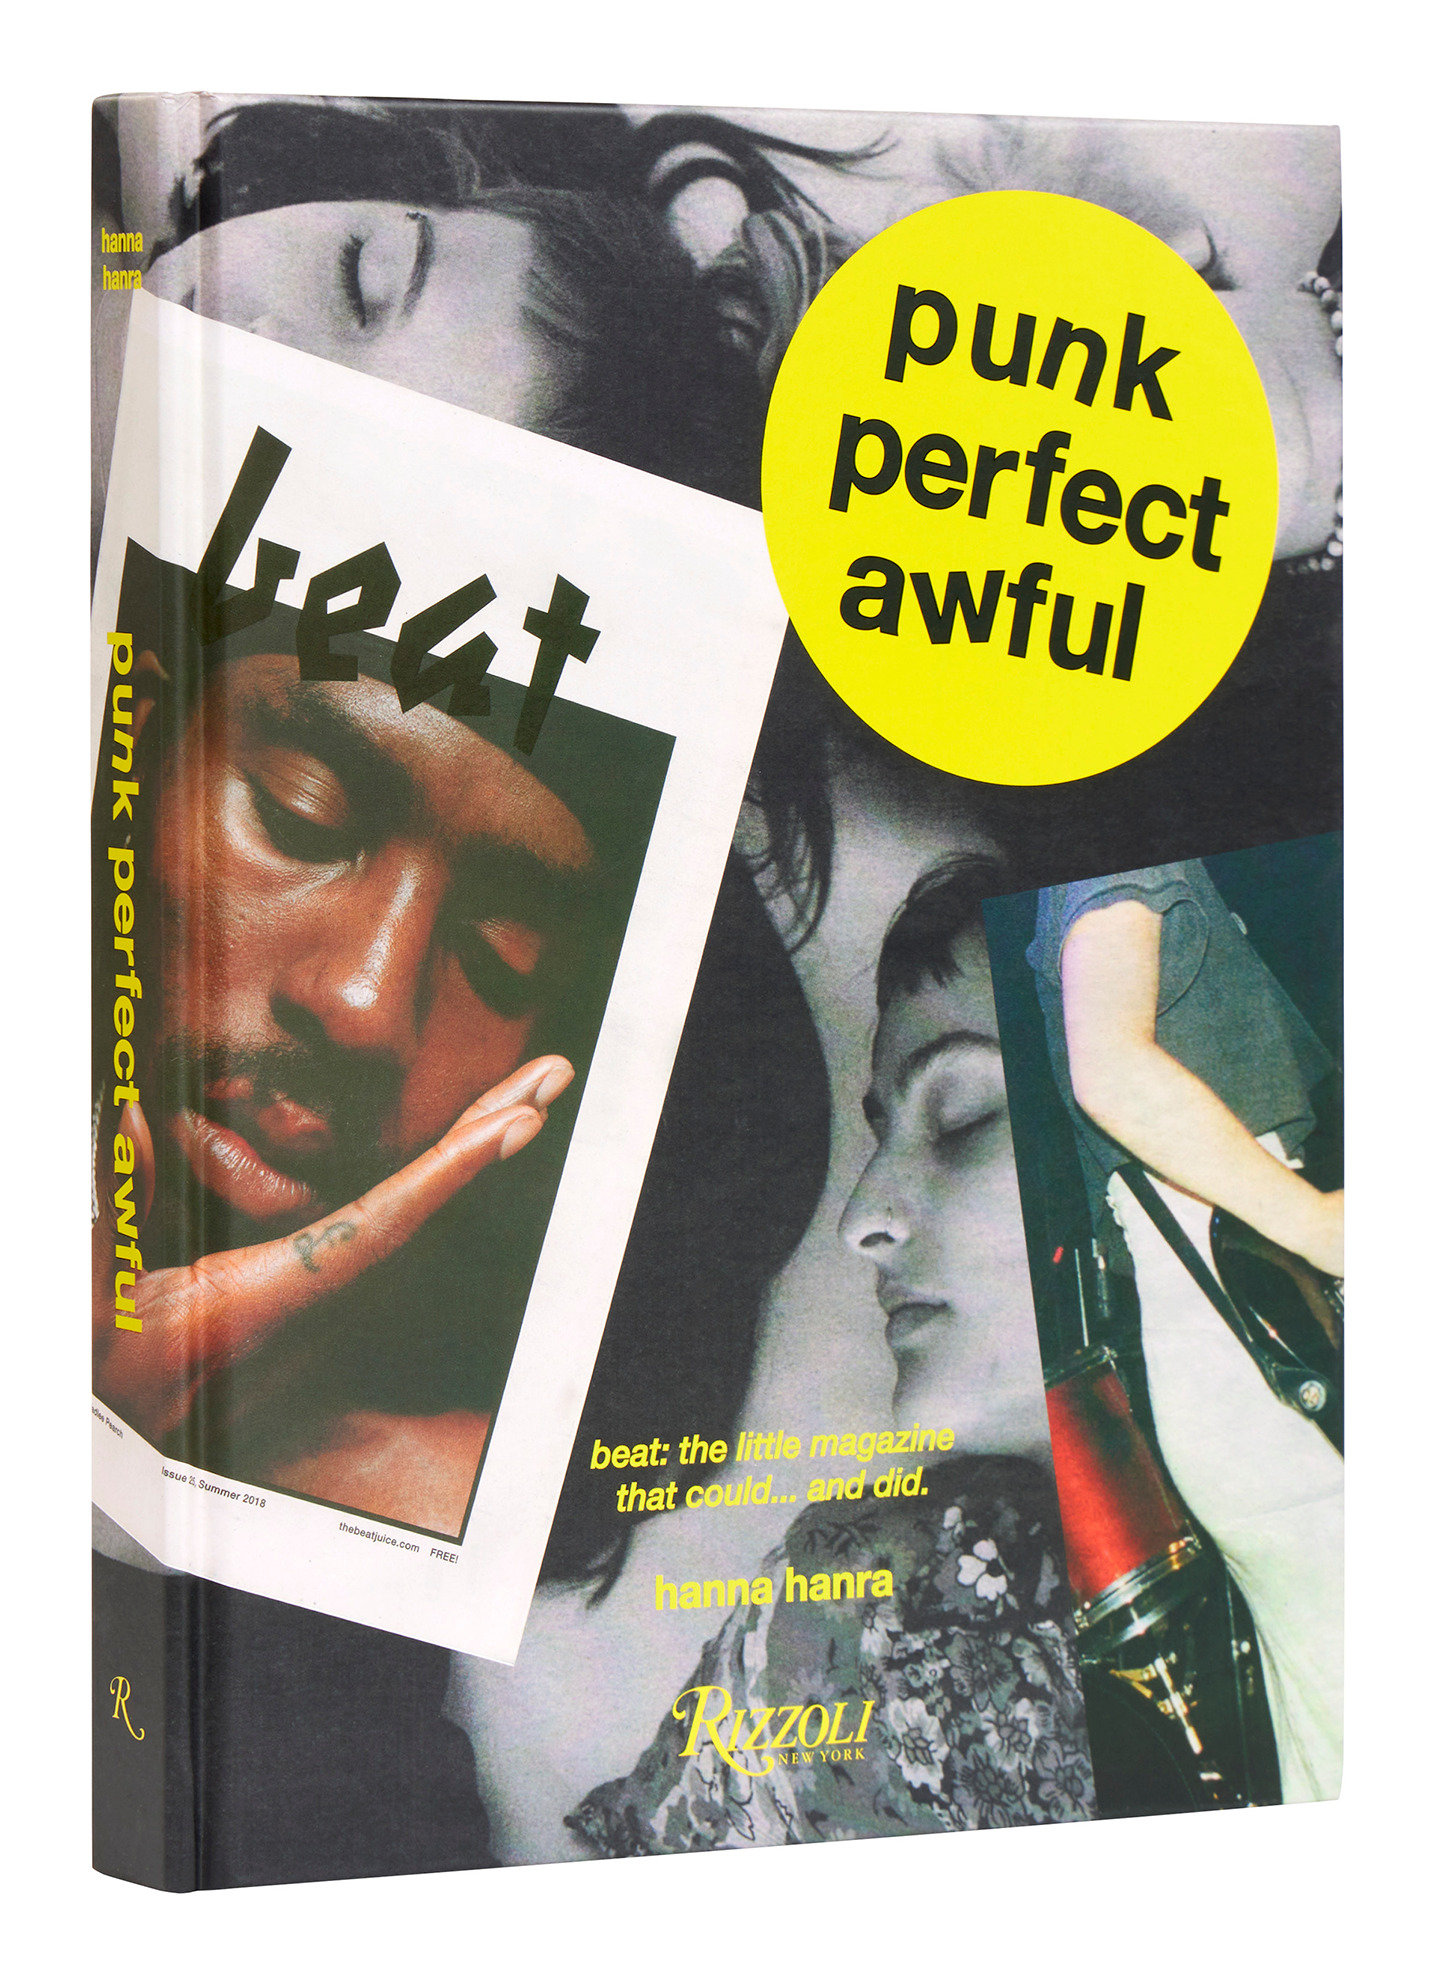 Punk Perfect Awful (Hardcover Book)